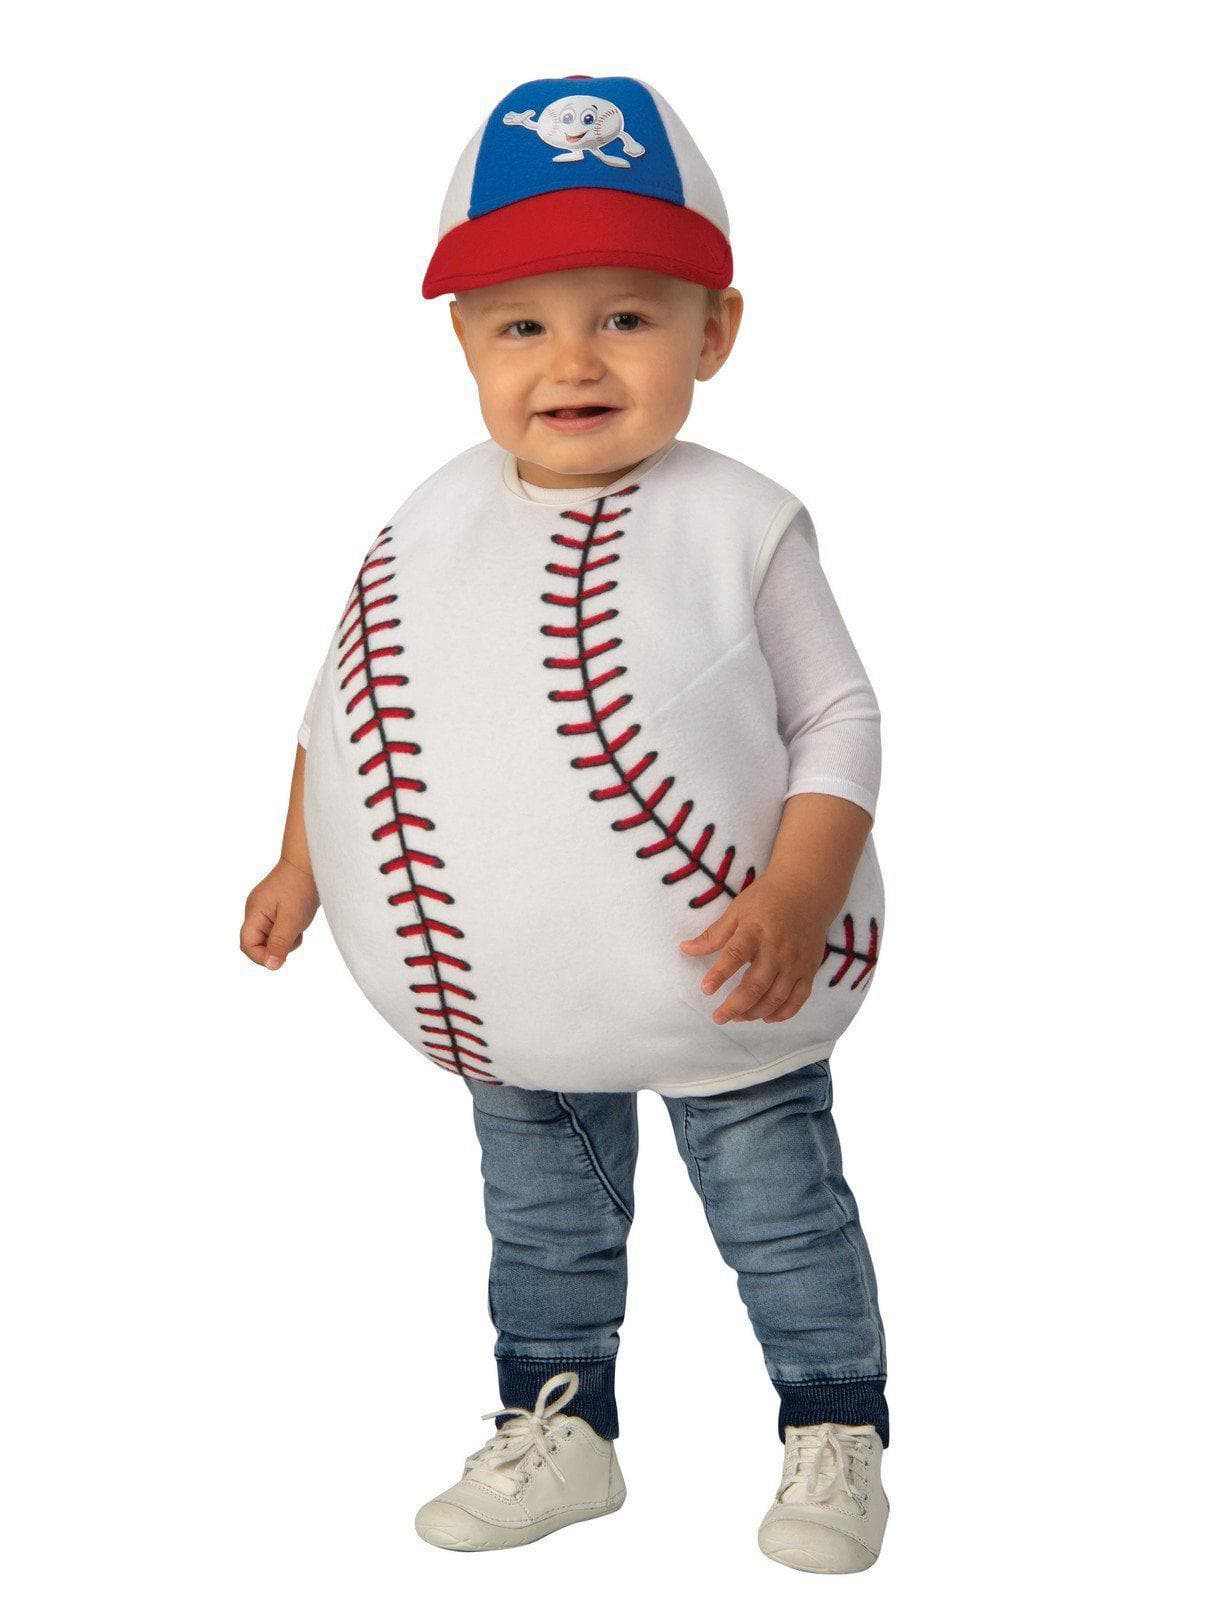 Baby/Toddler Lil' Baseball Costume - costumes.com